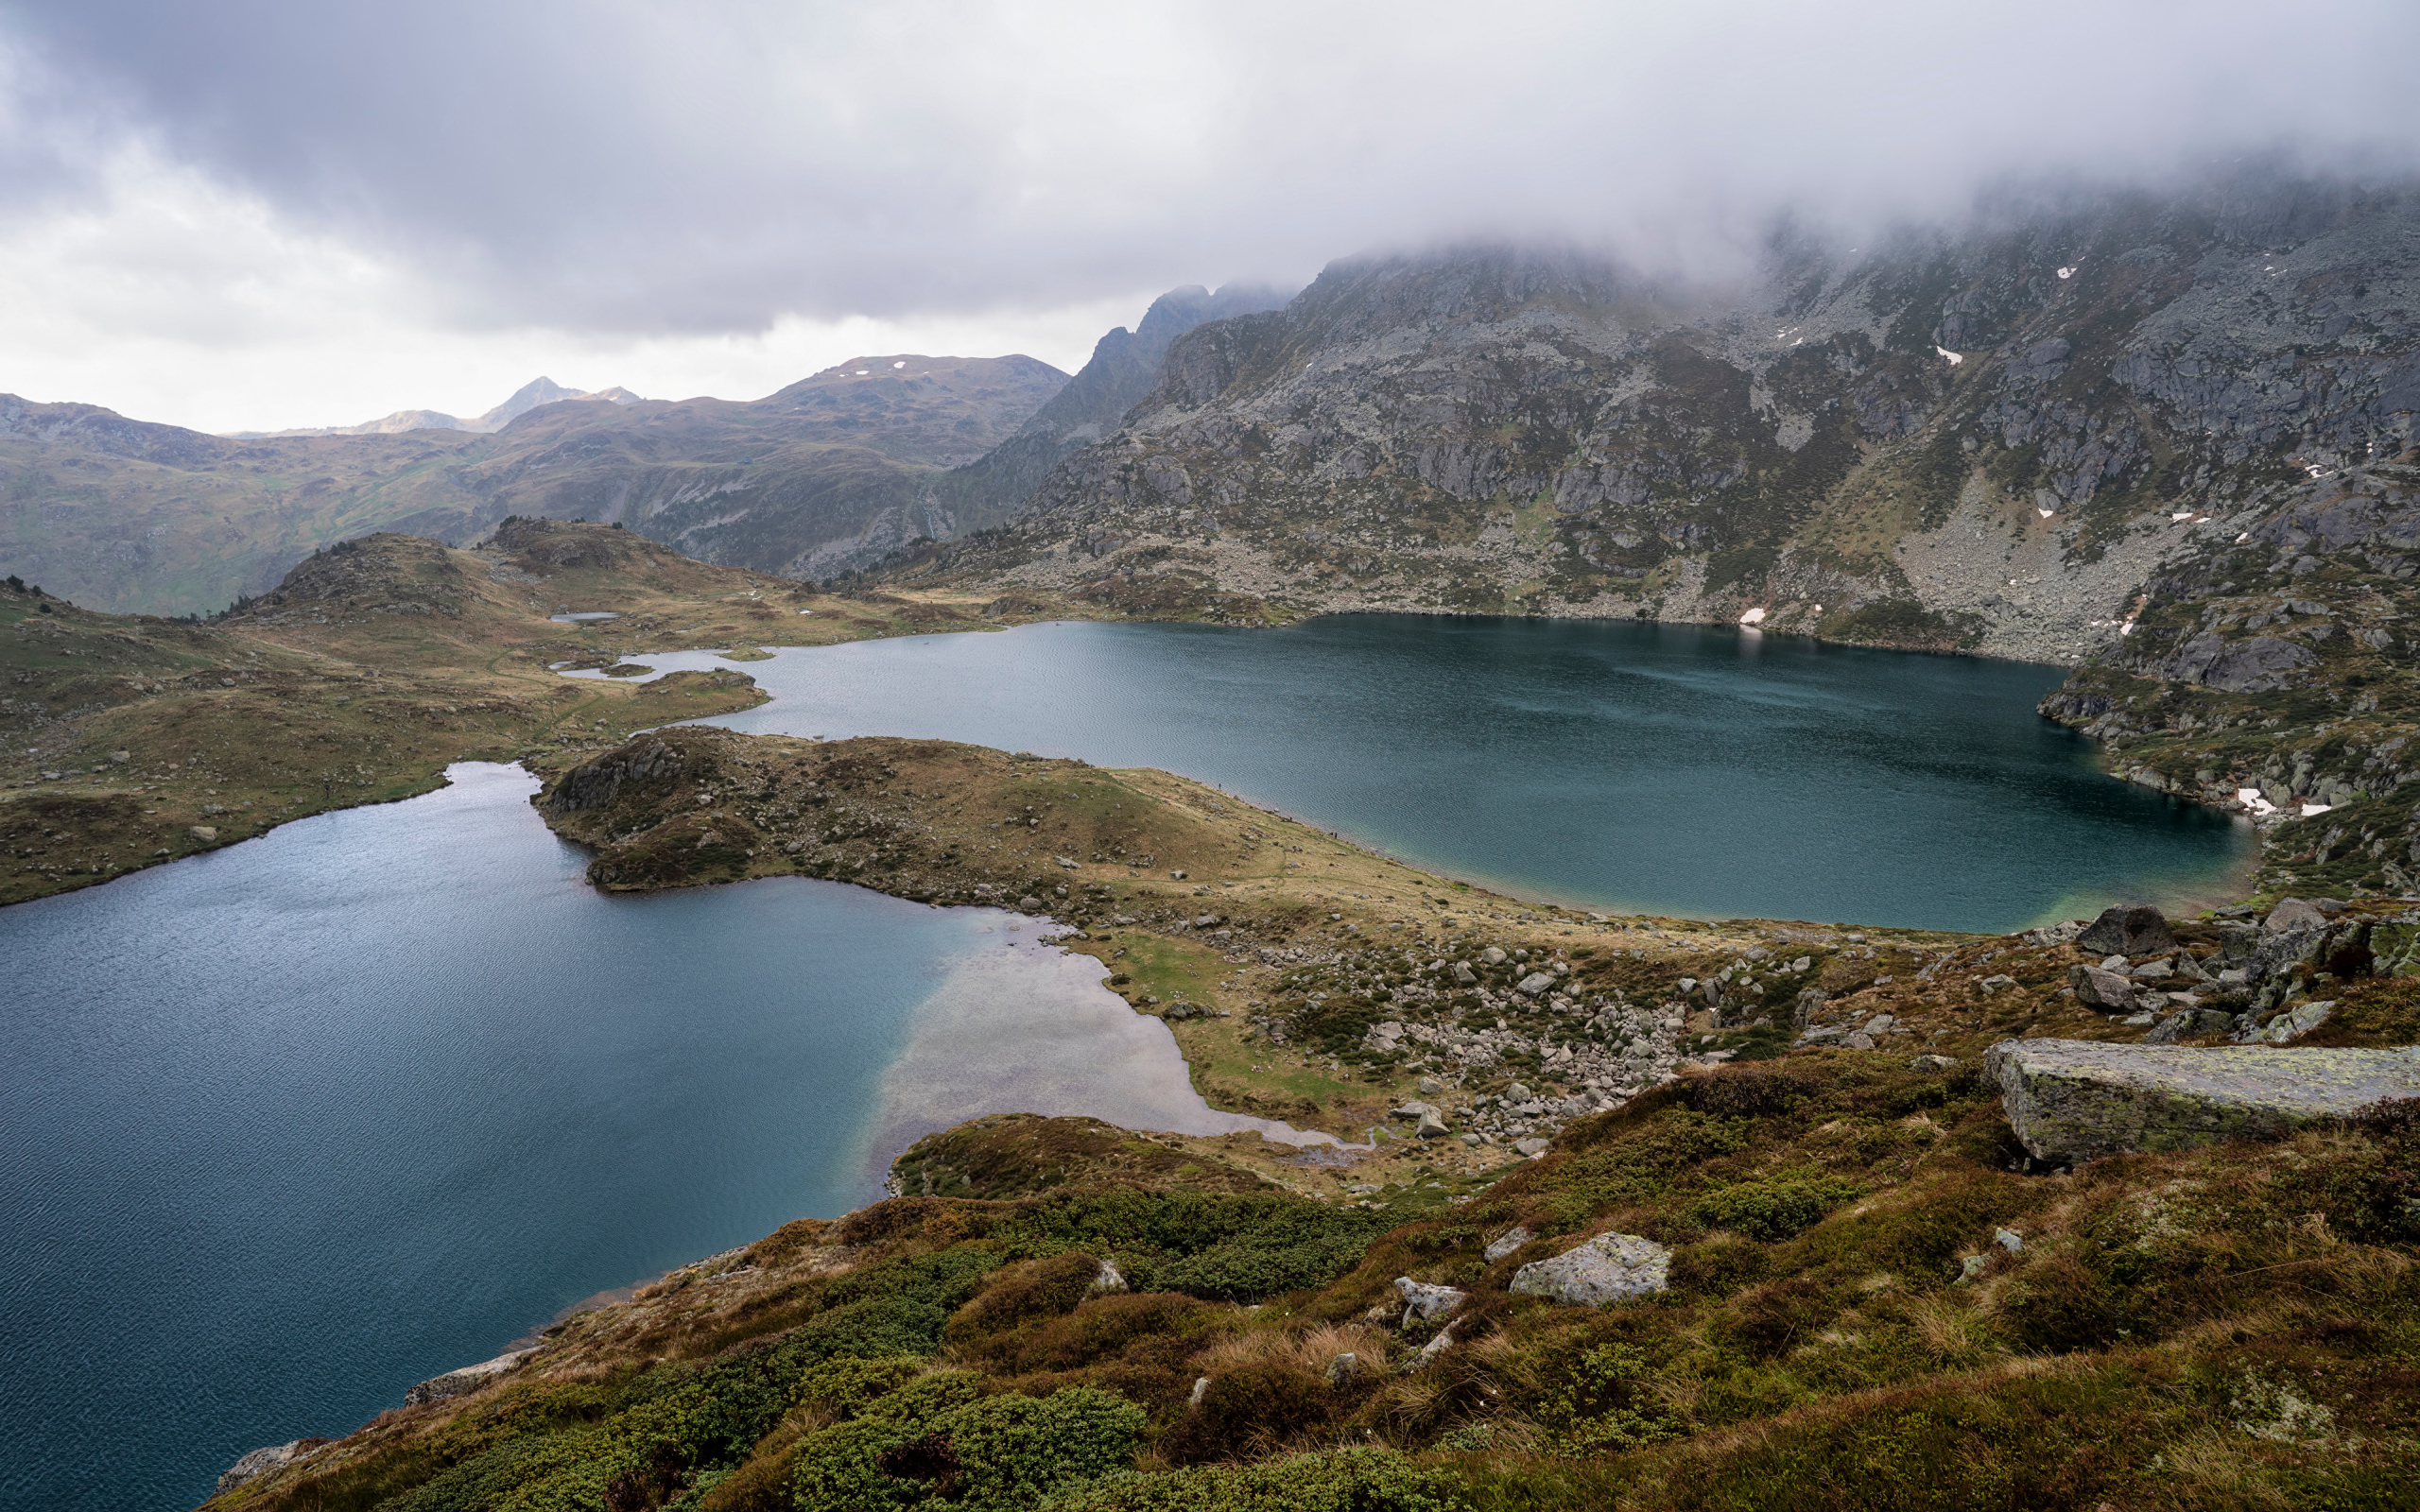 Mountain lakes in fog, France